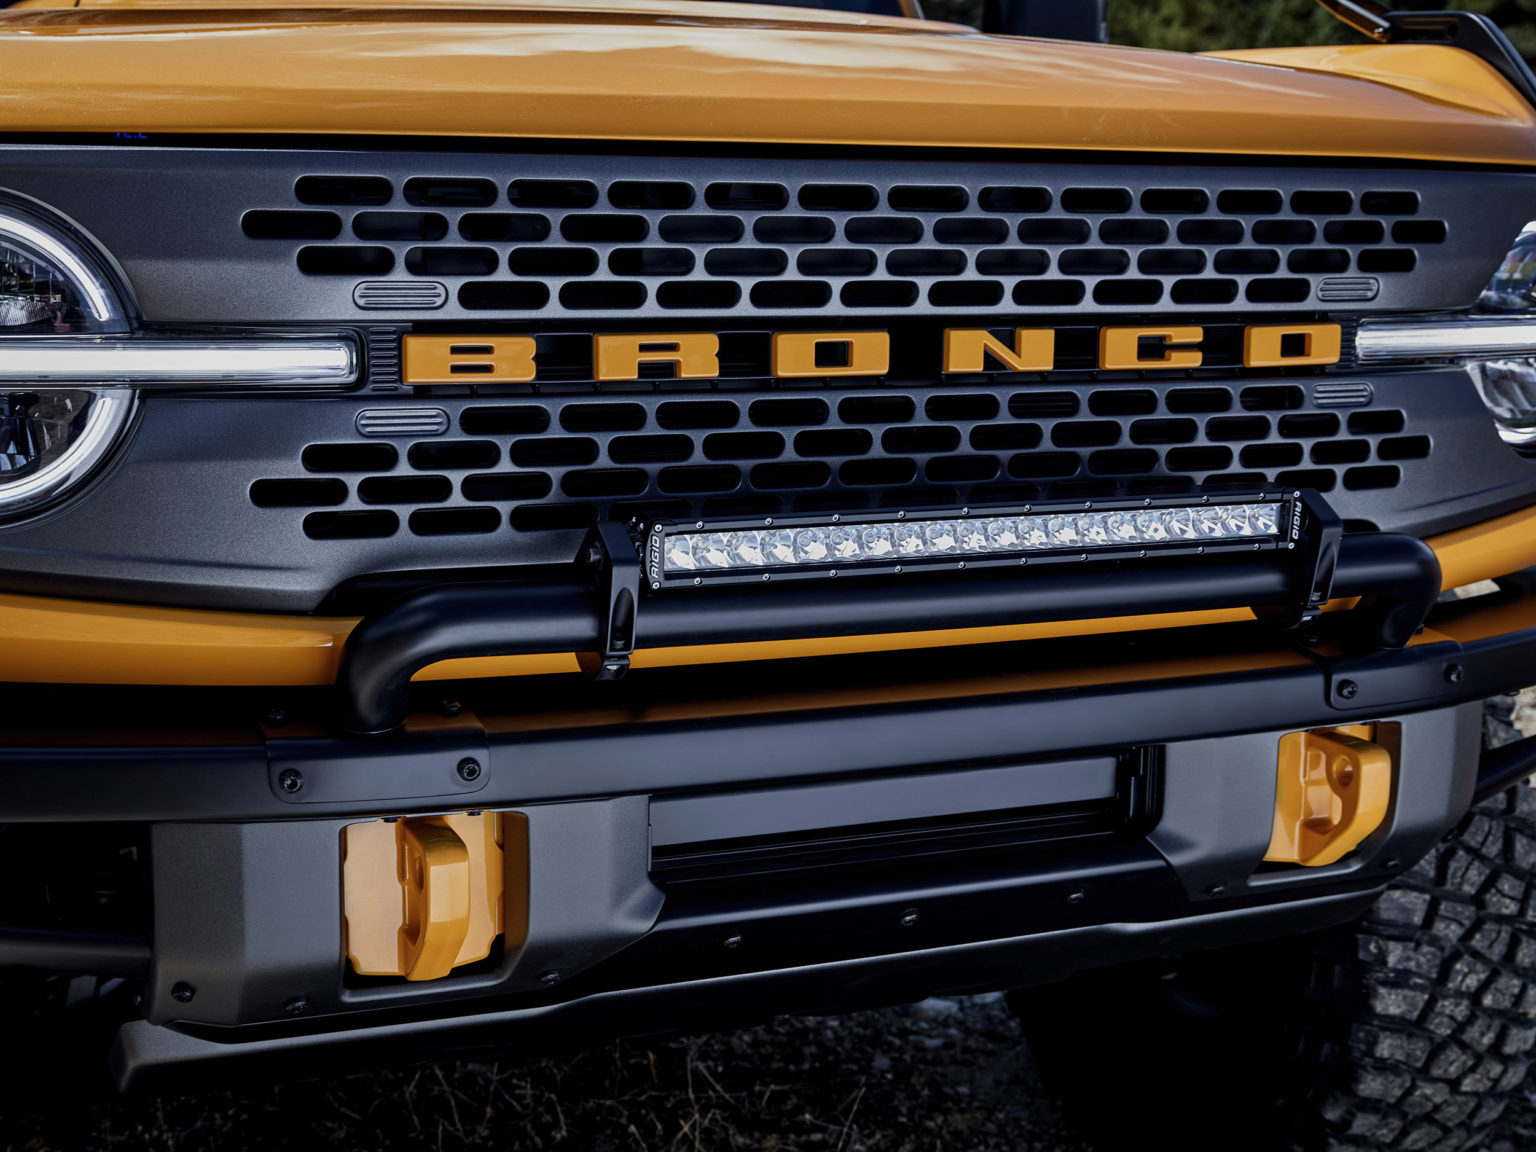 The 2021 Ford Bronco is very nearly ready to arrive on dealership lots.